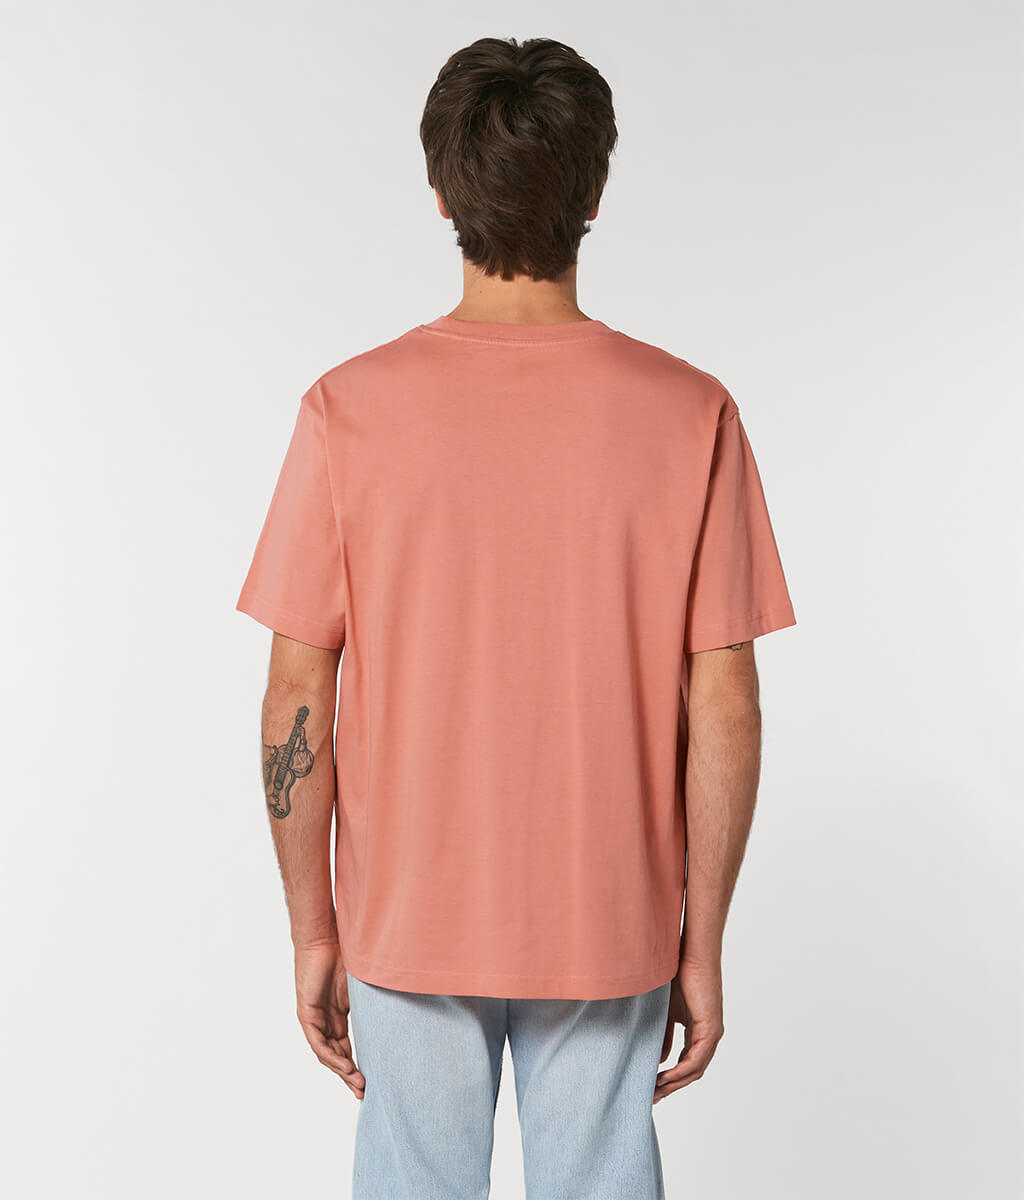 Fuser from Stanley/Stella - The Unisex Relaxed T-Shirt